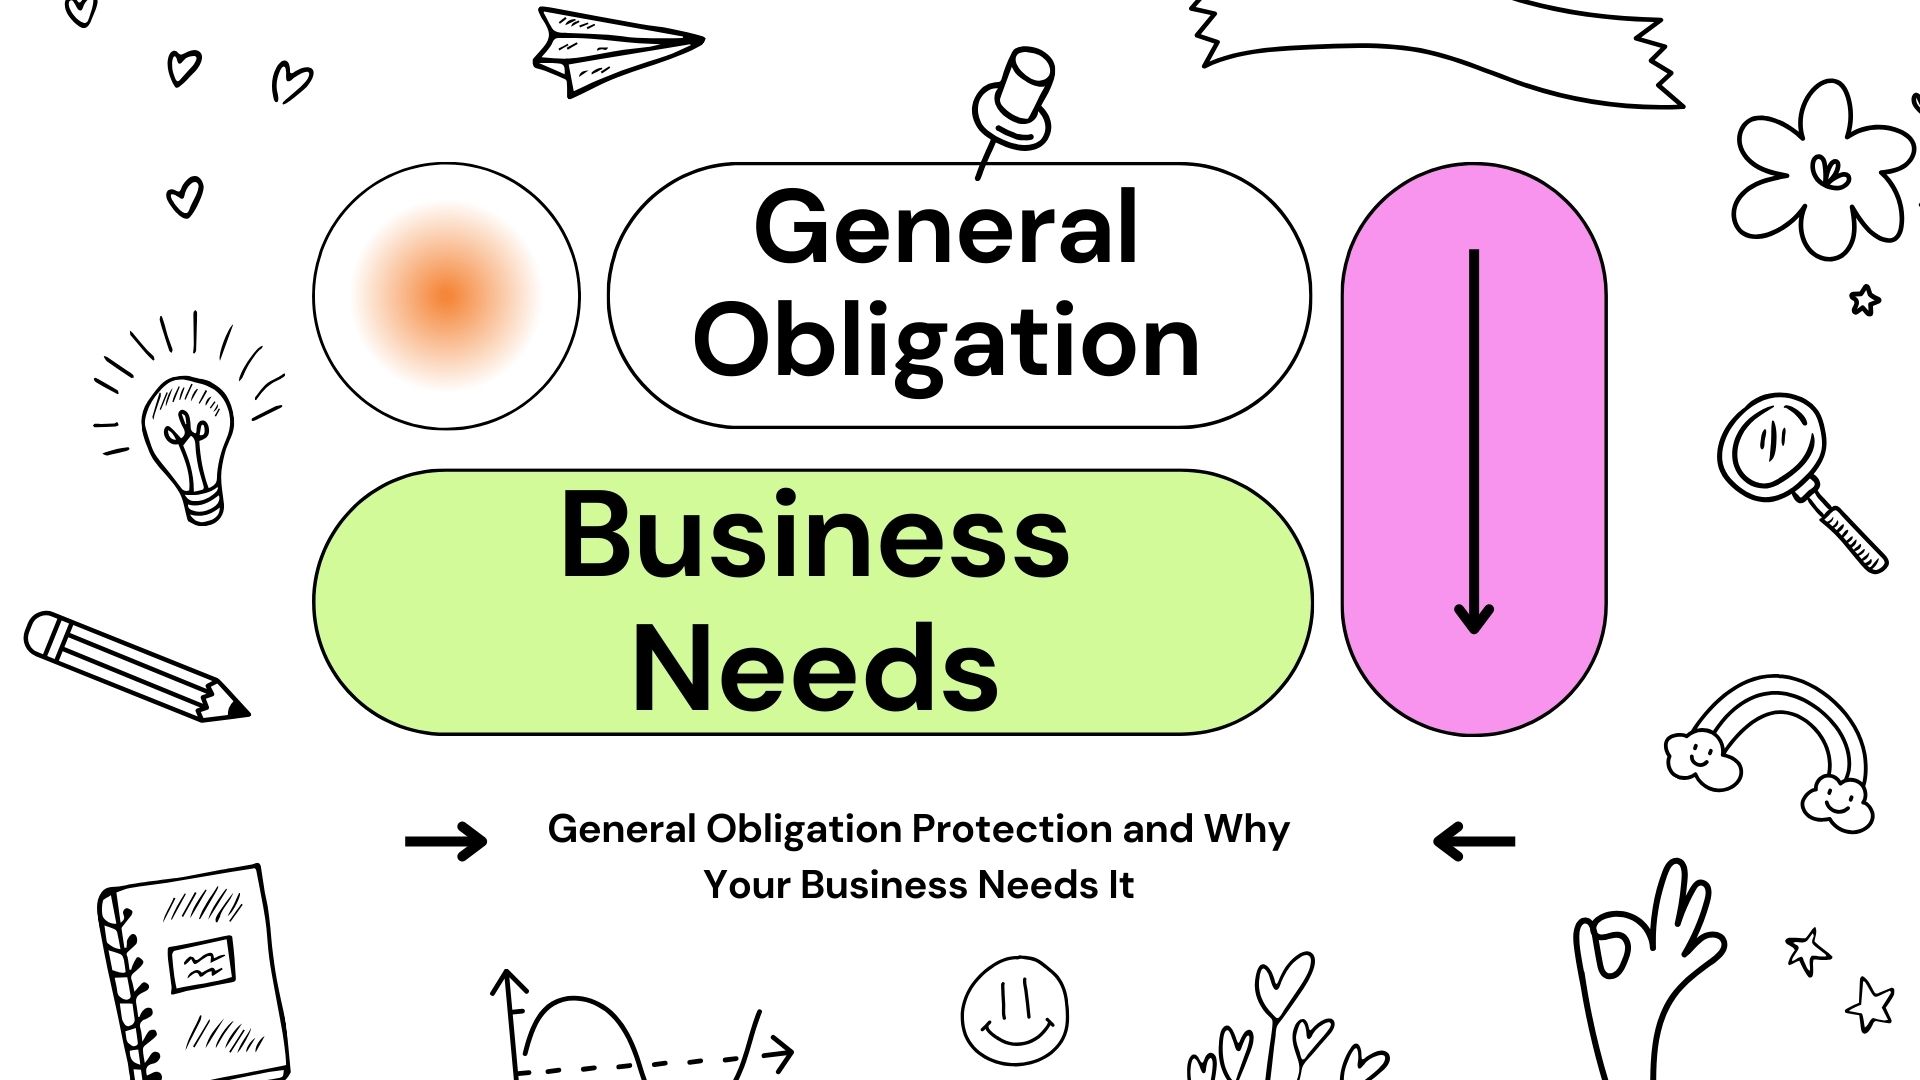 General Obligation Protection and Why Your Business Needs It